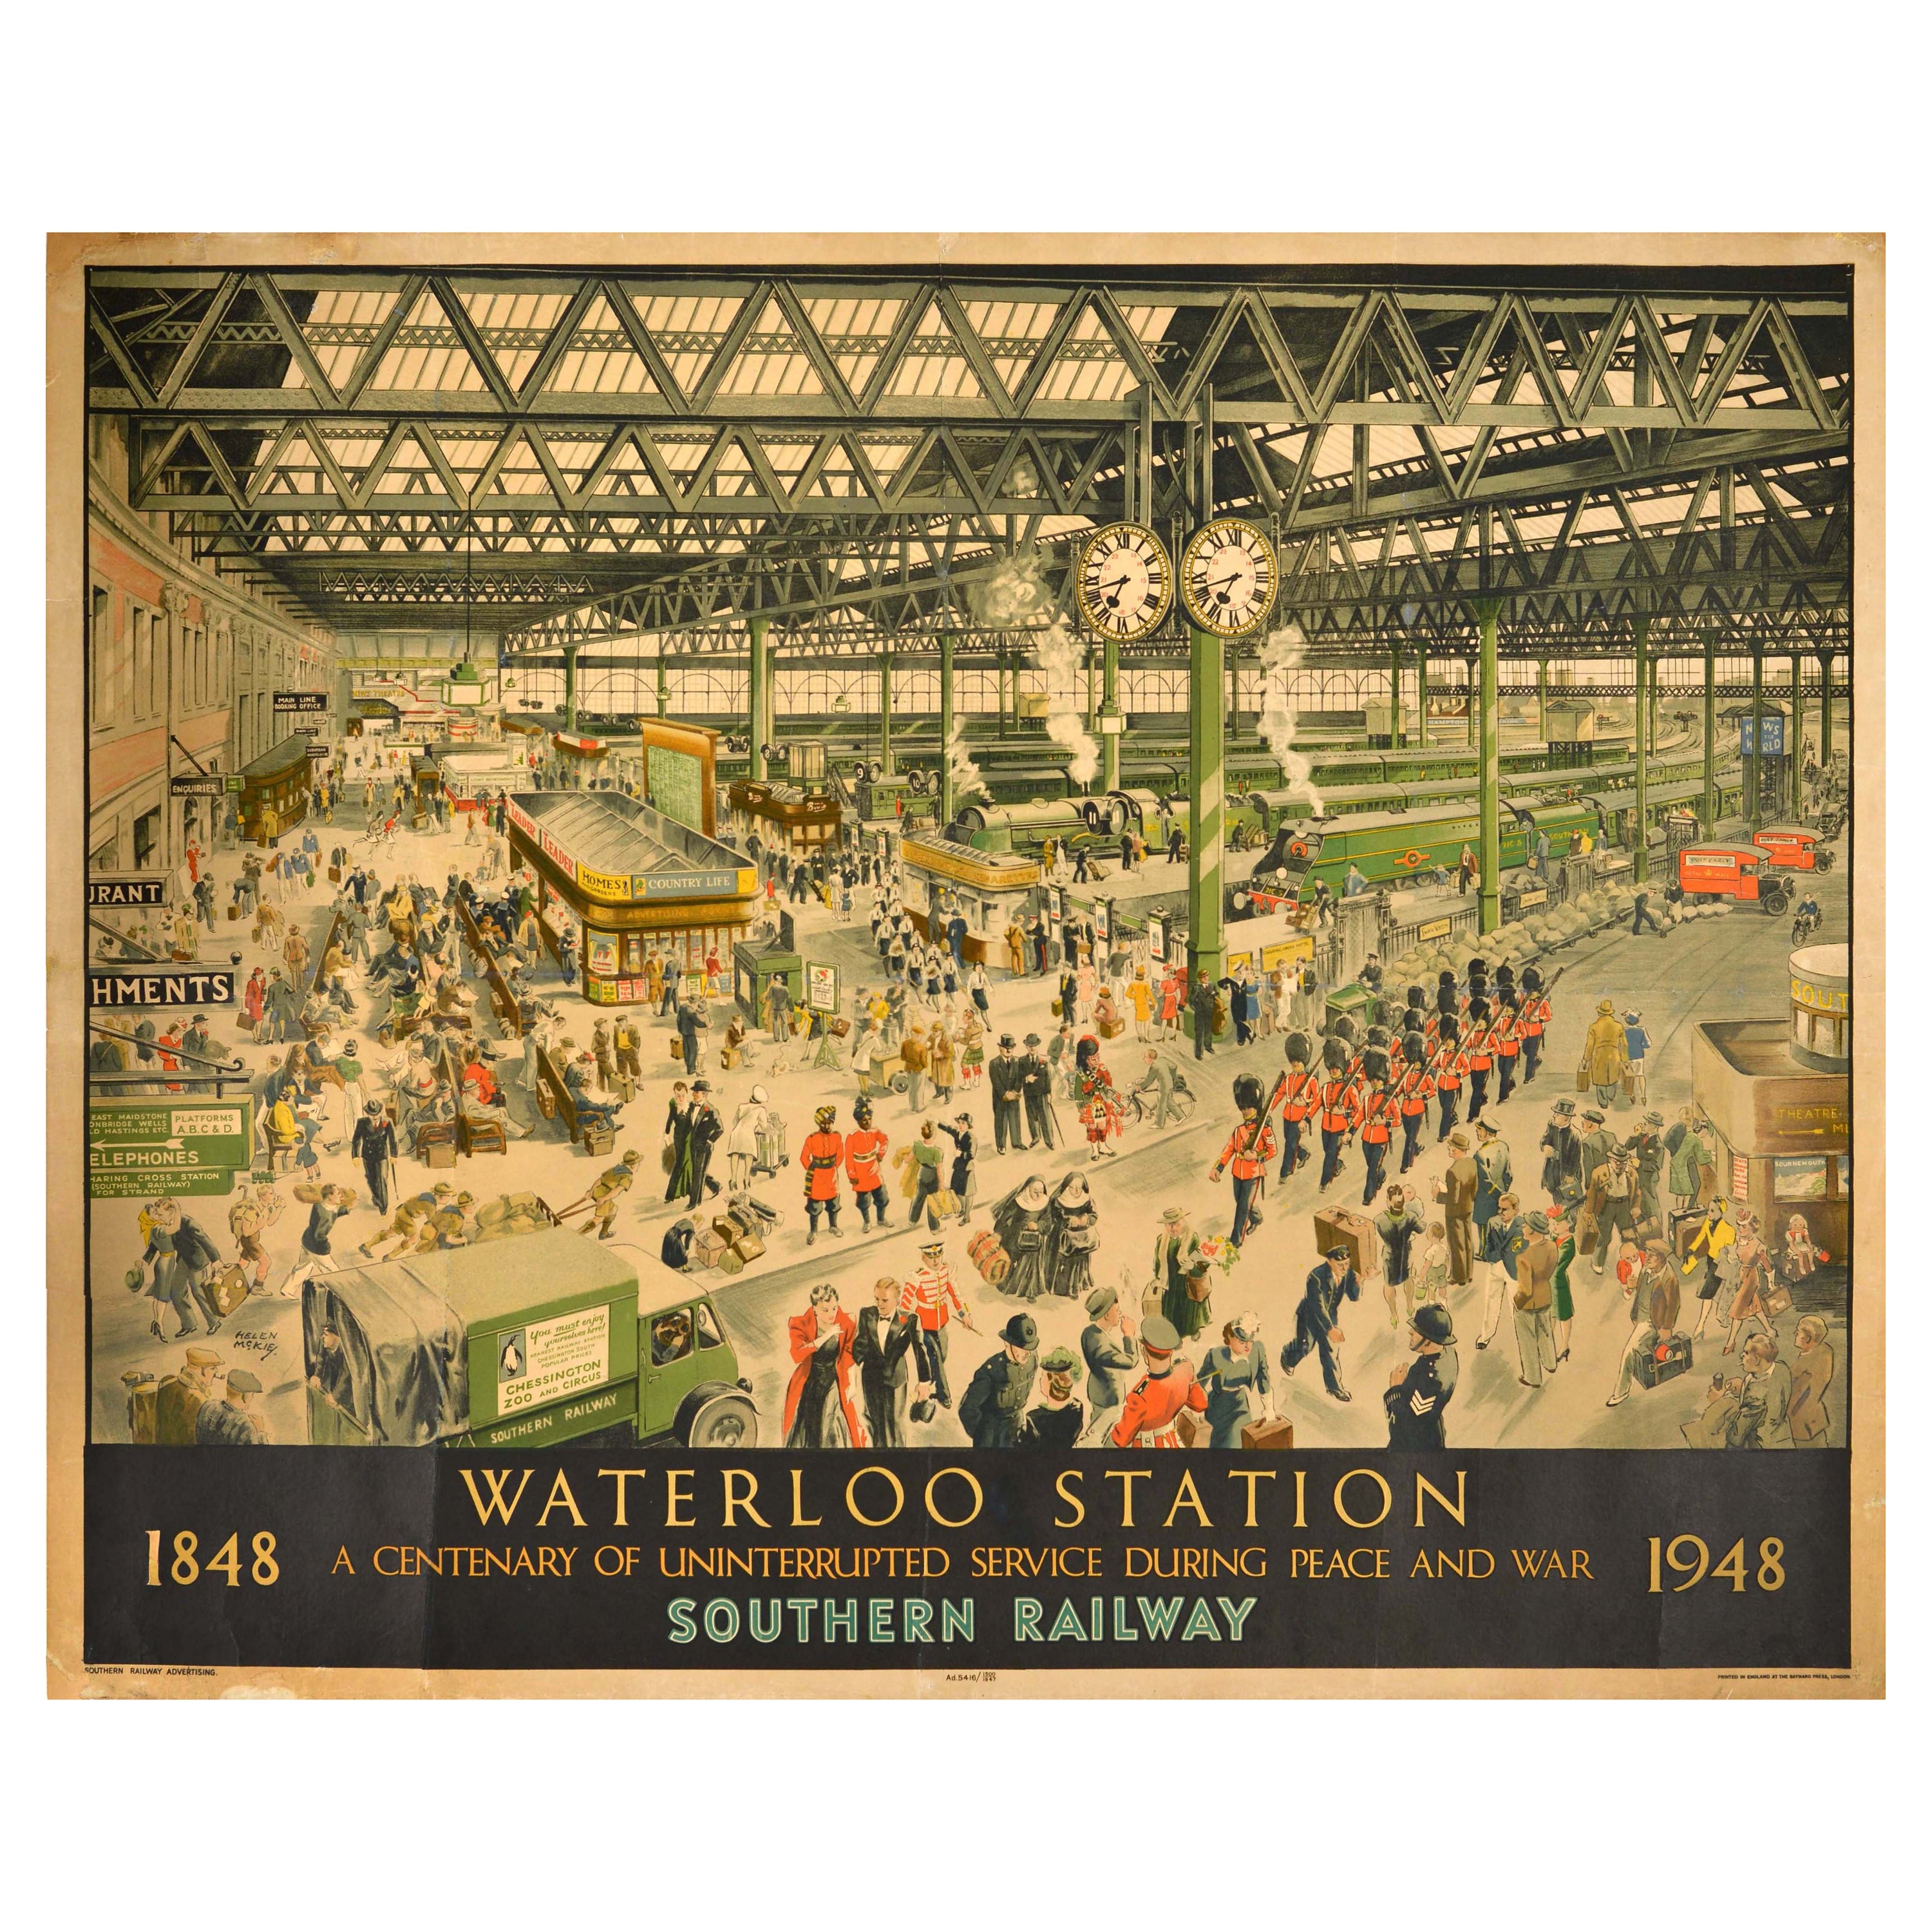 Original Vintage Travel Advertising Poster Waterloo Station Southern Railway For Sale